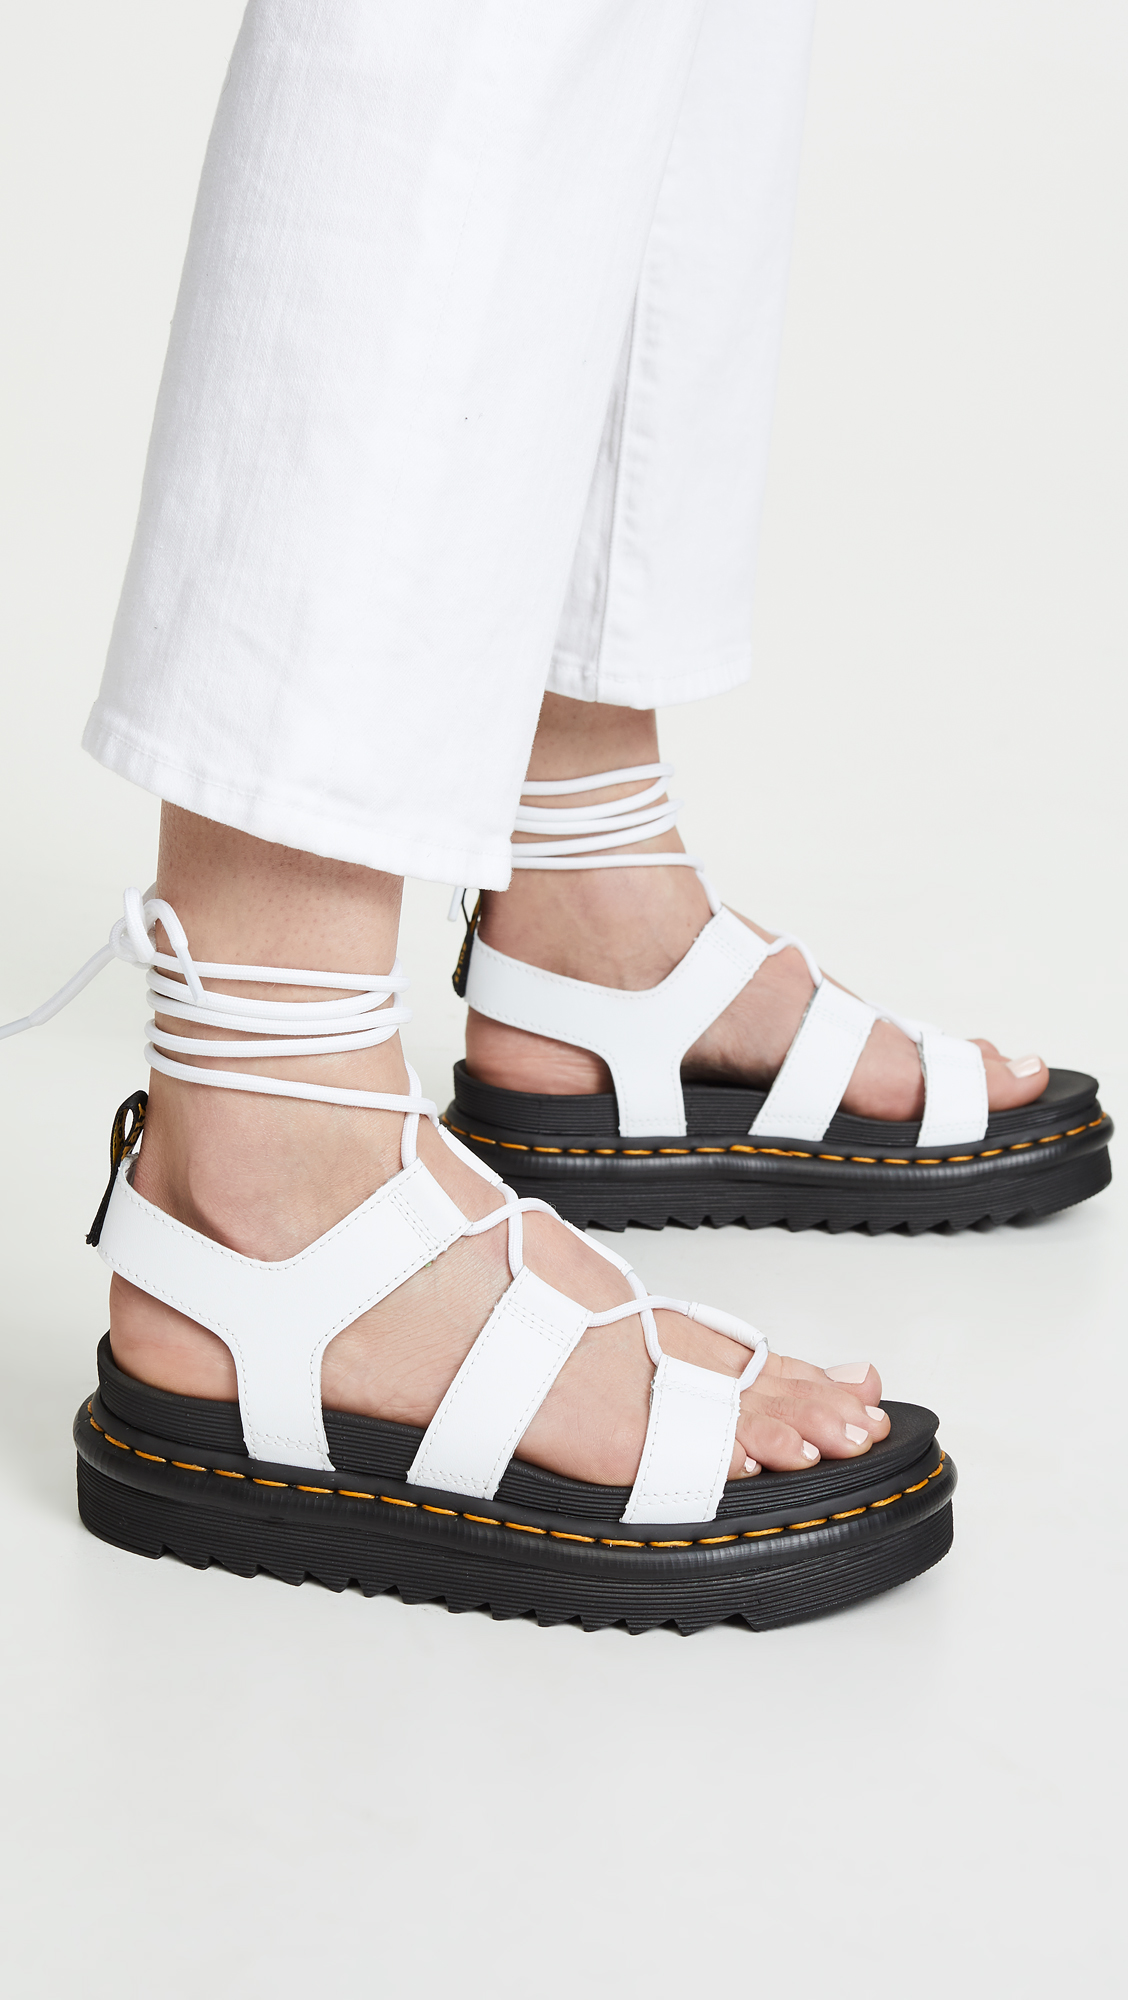 comfortable and fashionable sandals